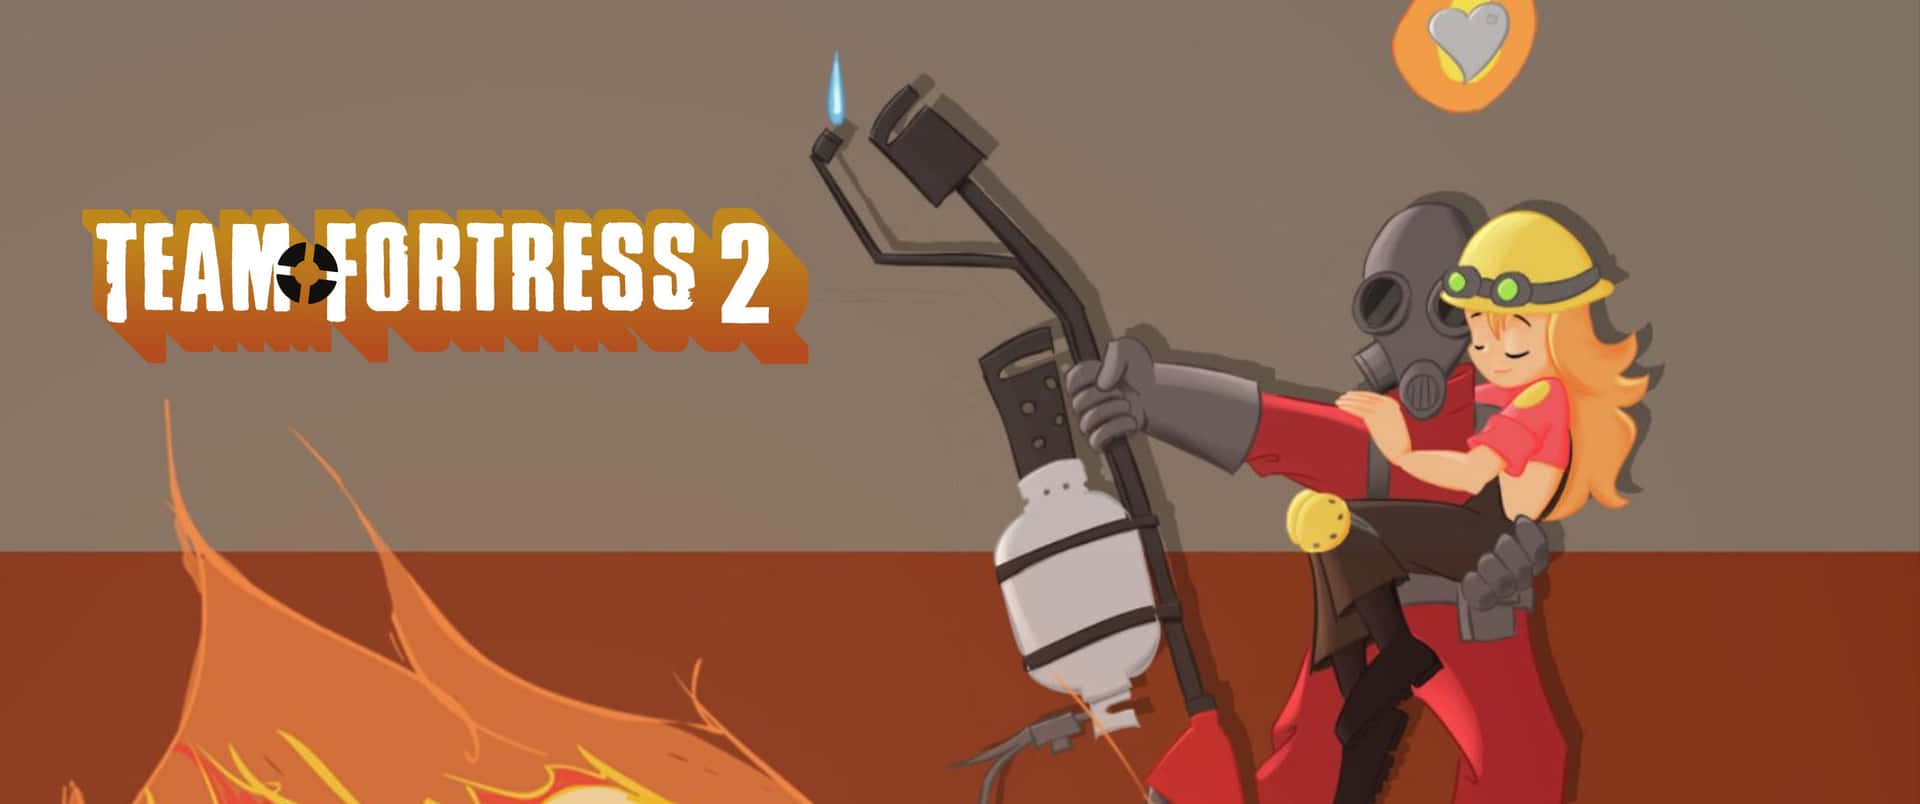 Enjoy the amazing graphics of Team Fortress 2 in stunning 3440x1440p resolution